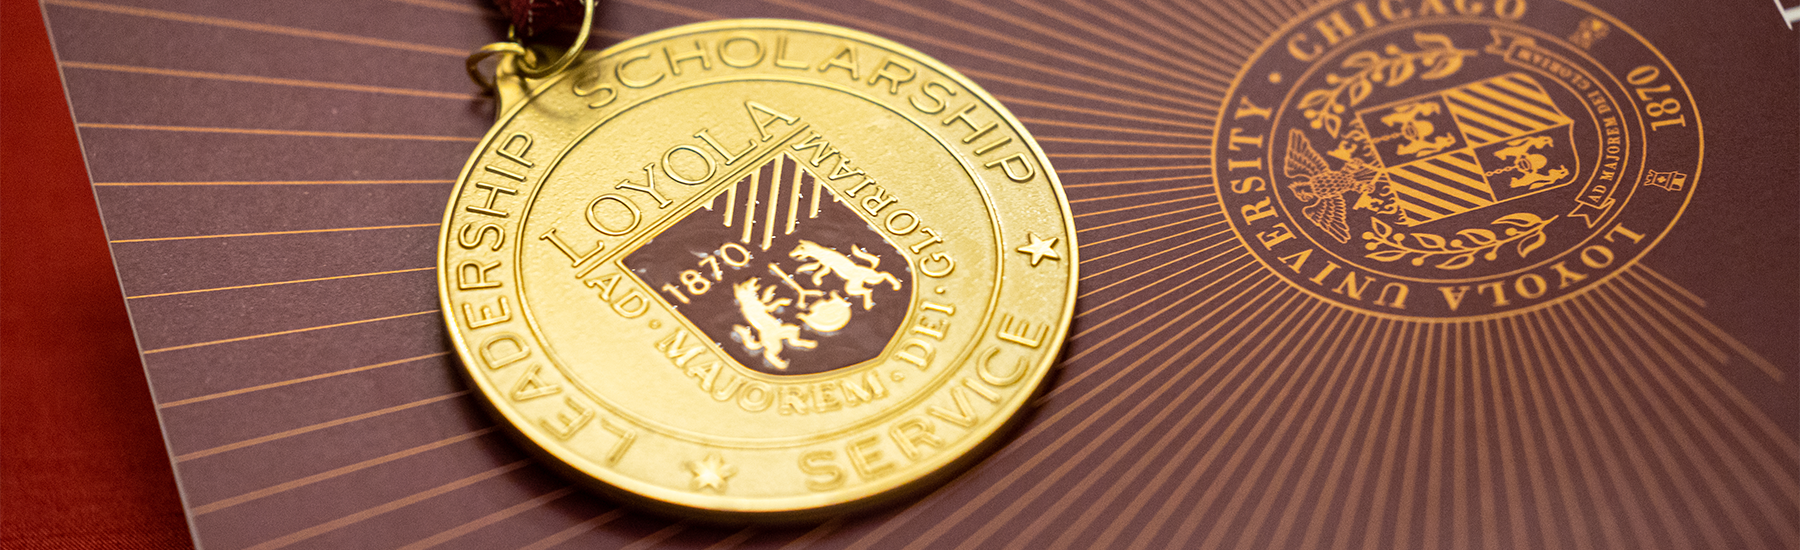 The President's Medallion is awarded each year to students who exemplify a combination of outstanding scholarship, leadership, and service.